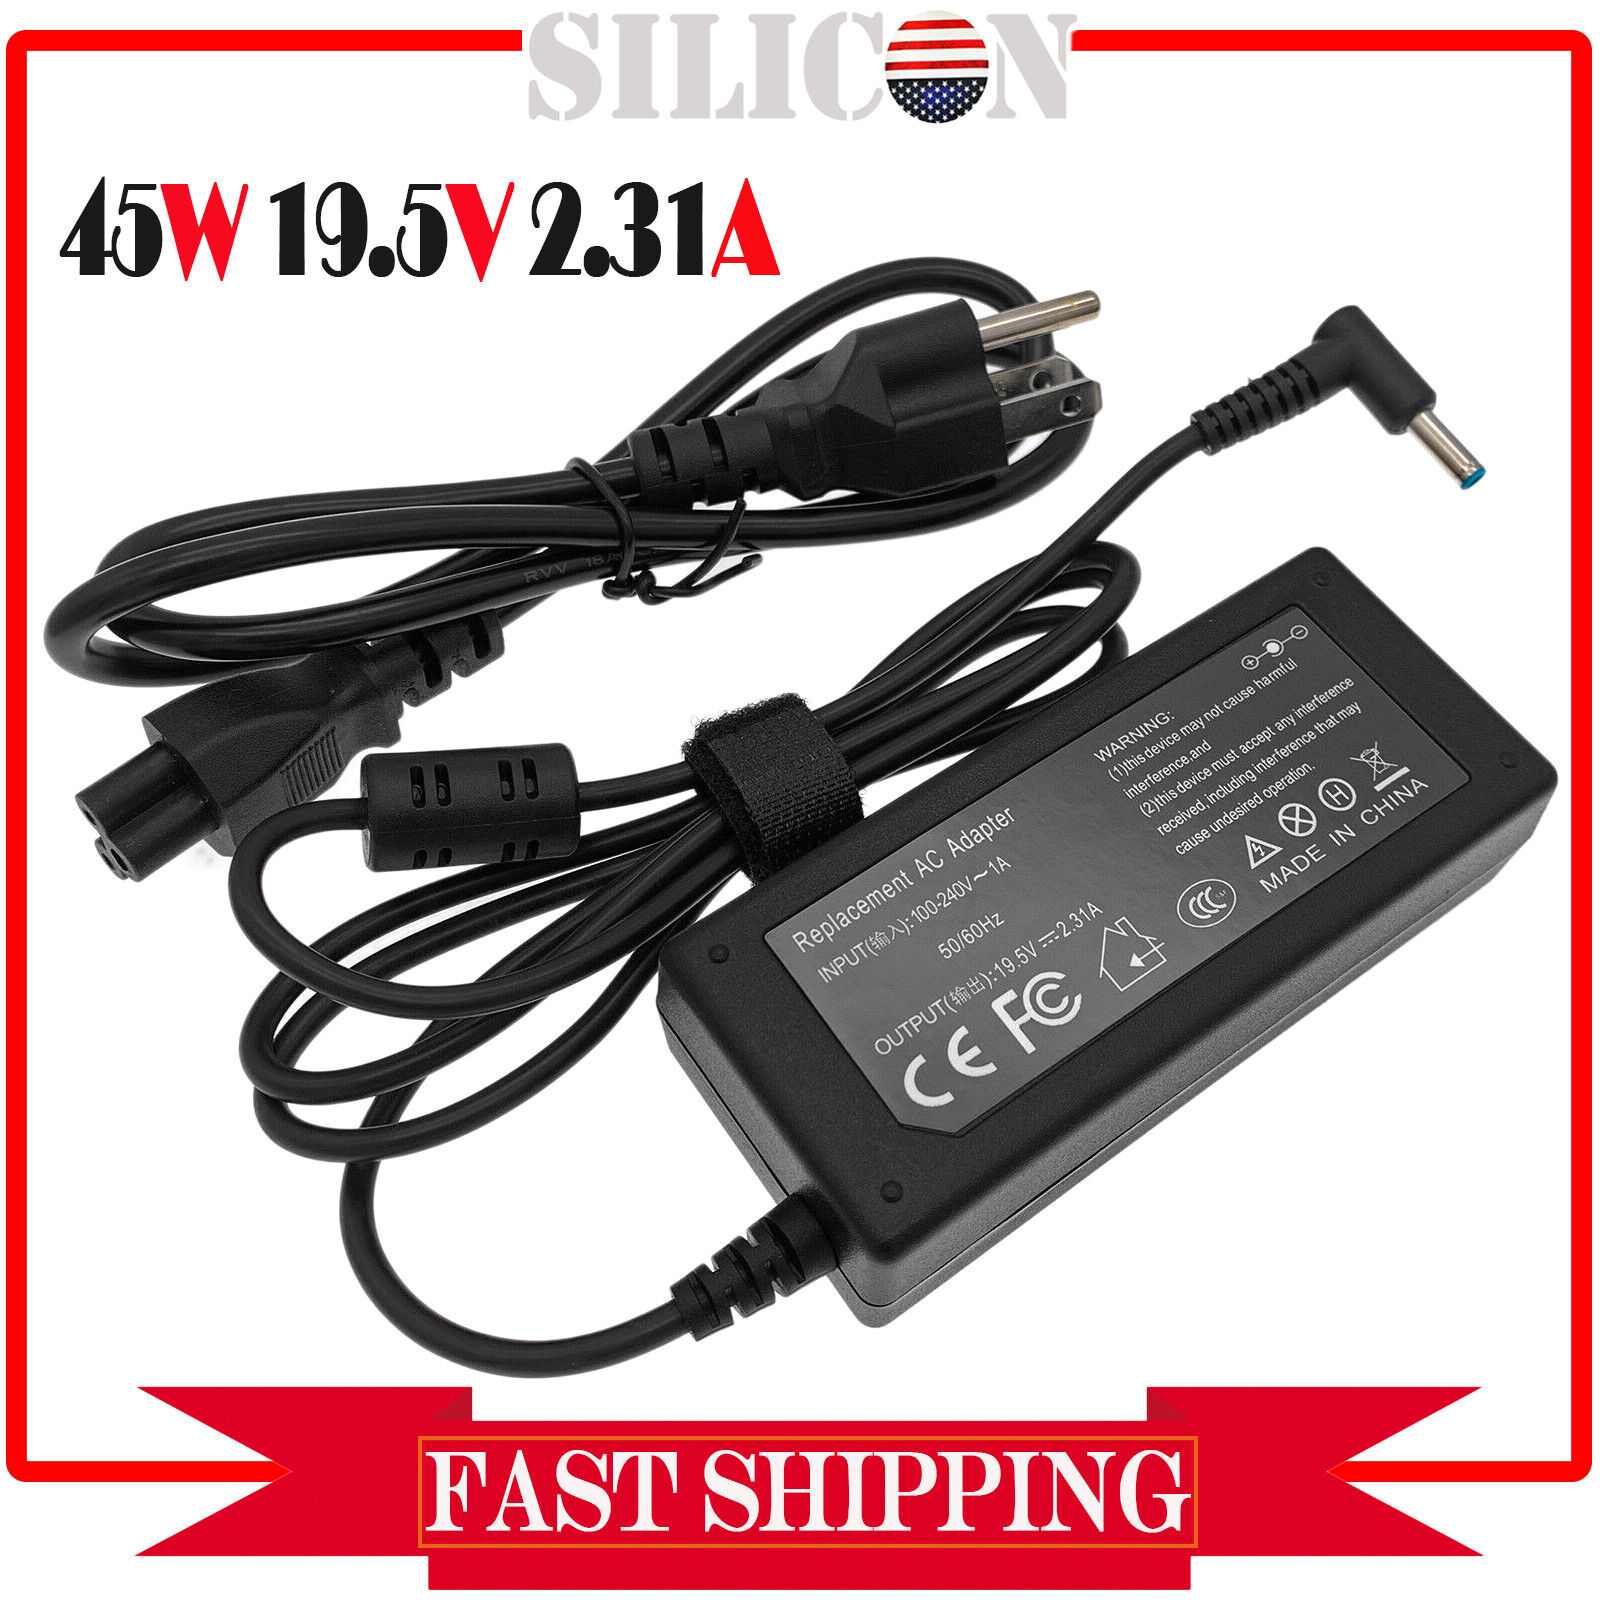 New 45W AC Power Charger Adapter For HP 15-BW011DX 1KV27UA Laptop PC Supply Cord